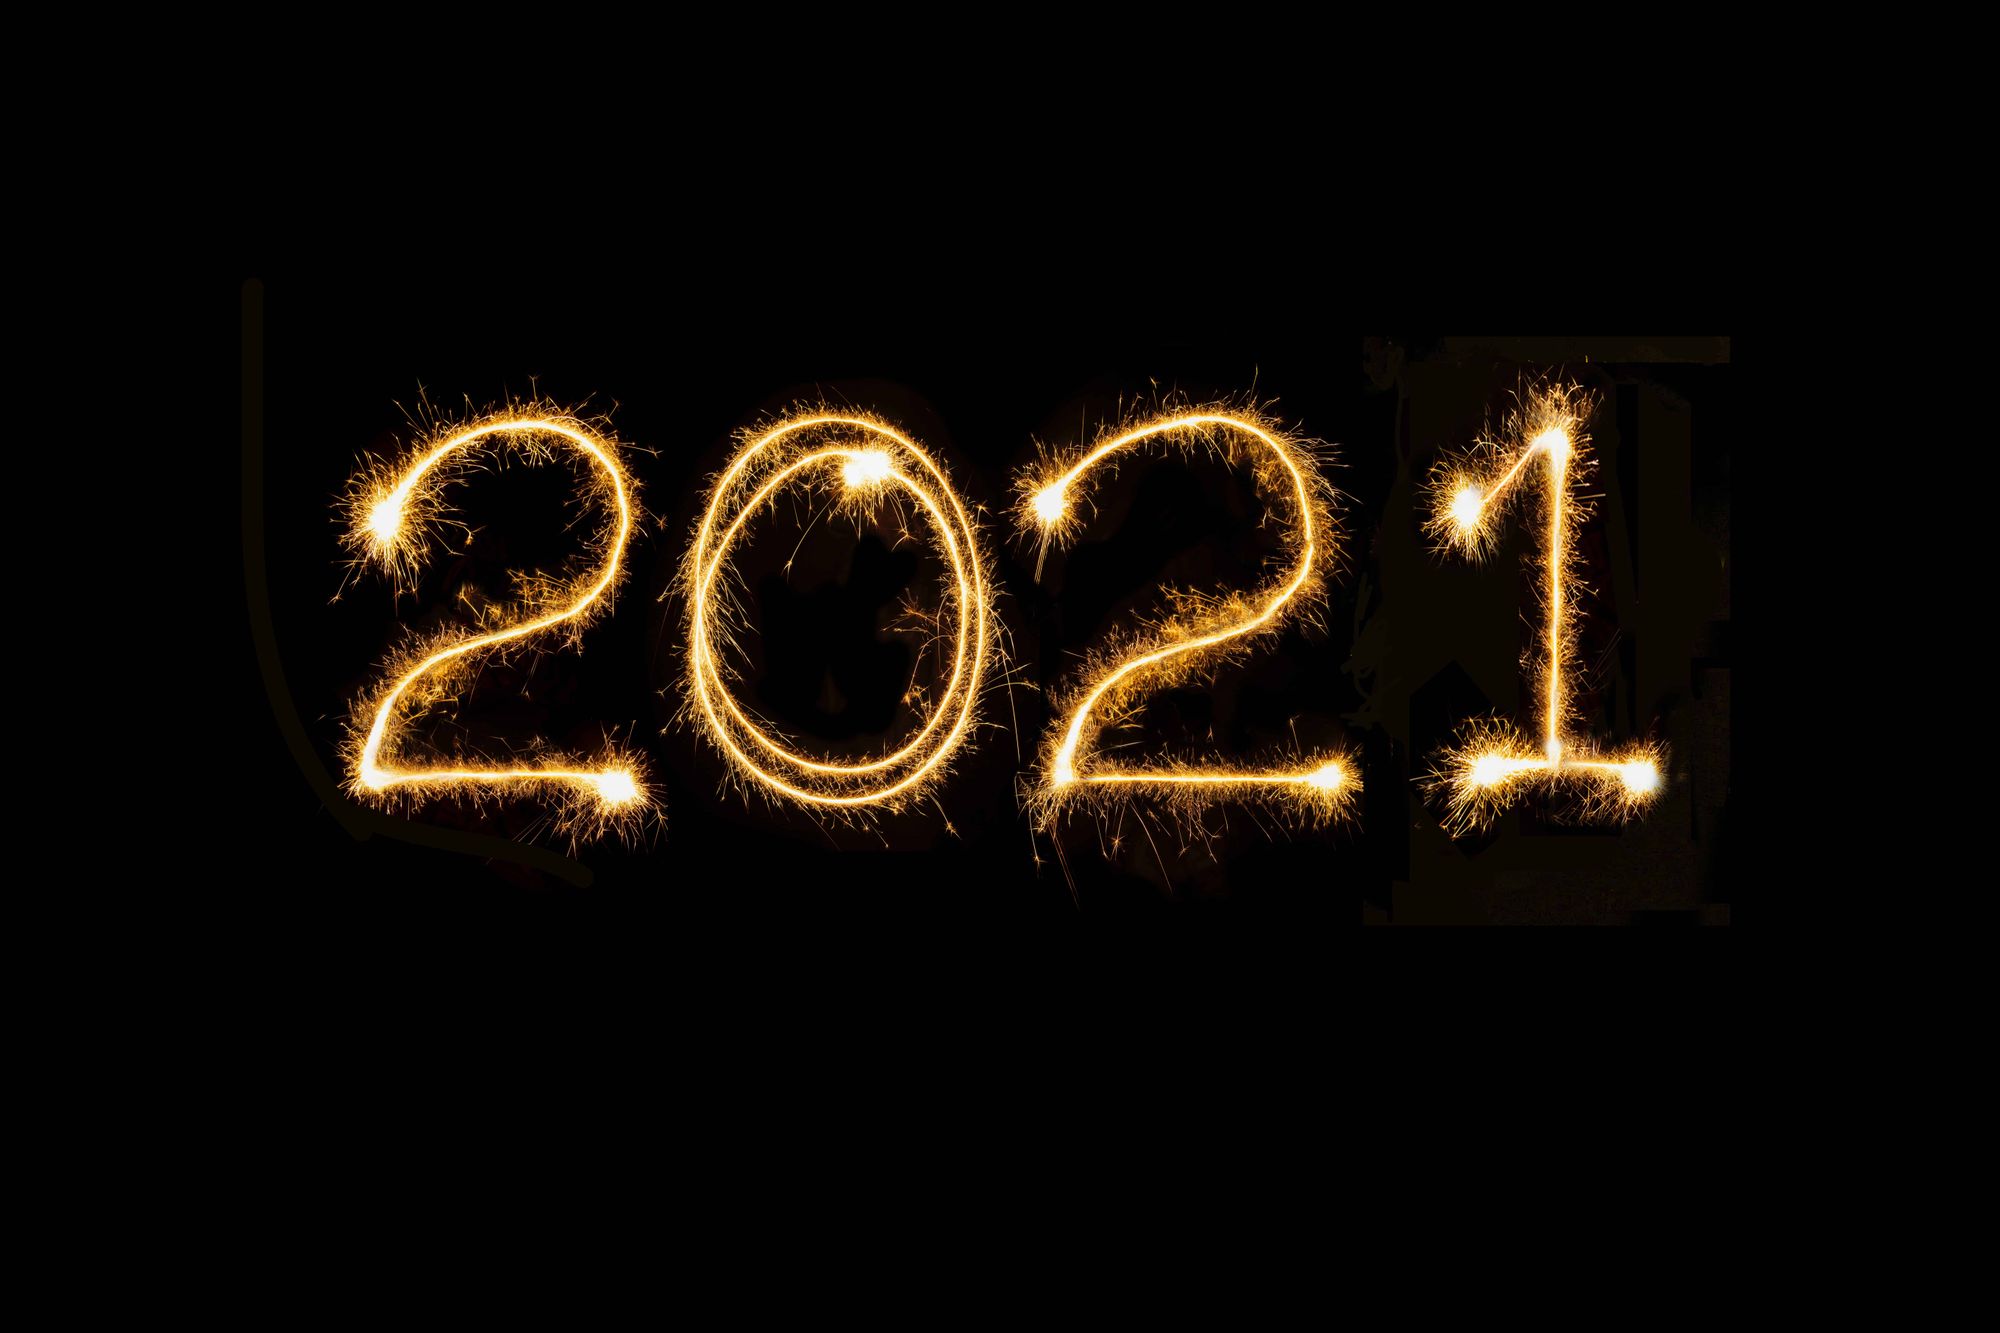 Three Very Personal Wishes for 2021 as a Blogger